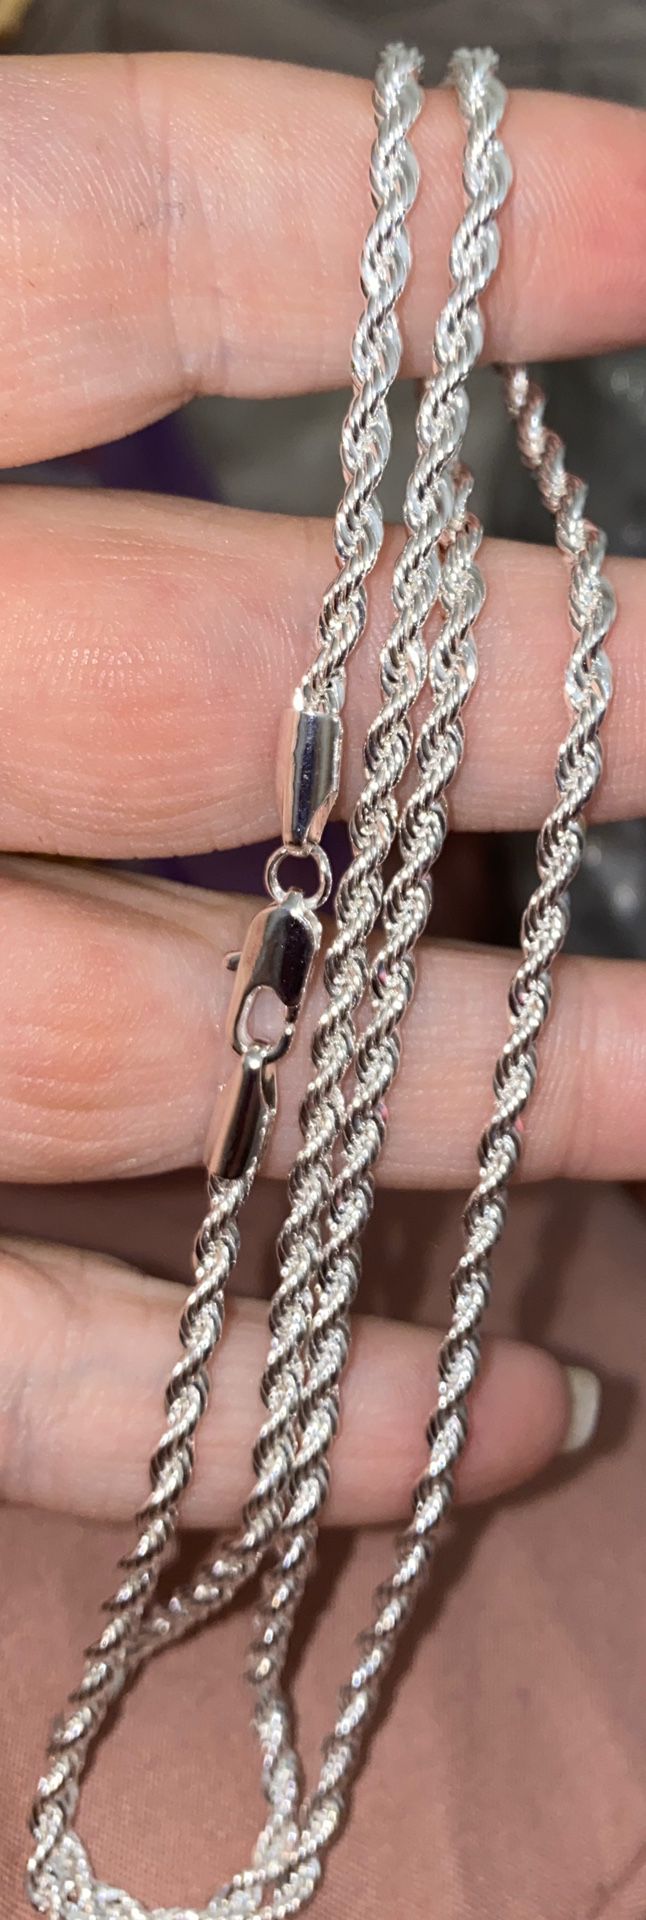 14k White Gold Filled Diamond Cut Rope Chain wont Fade Free Shipping Using PayPal